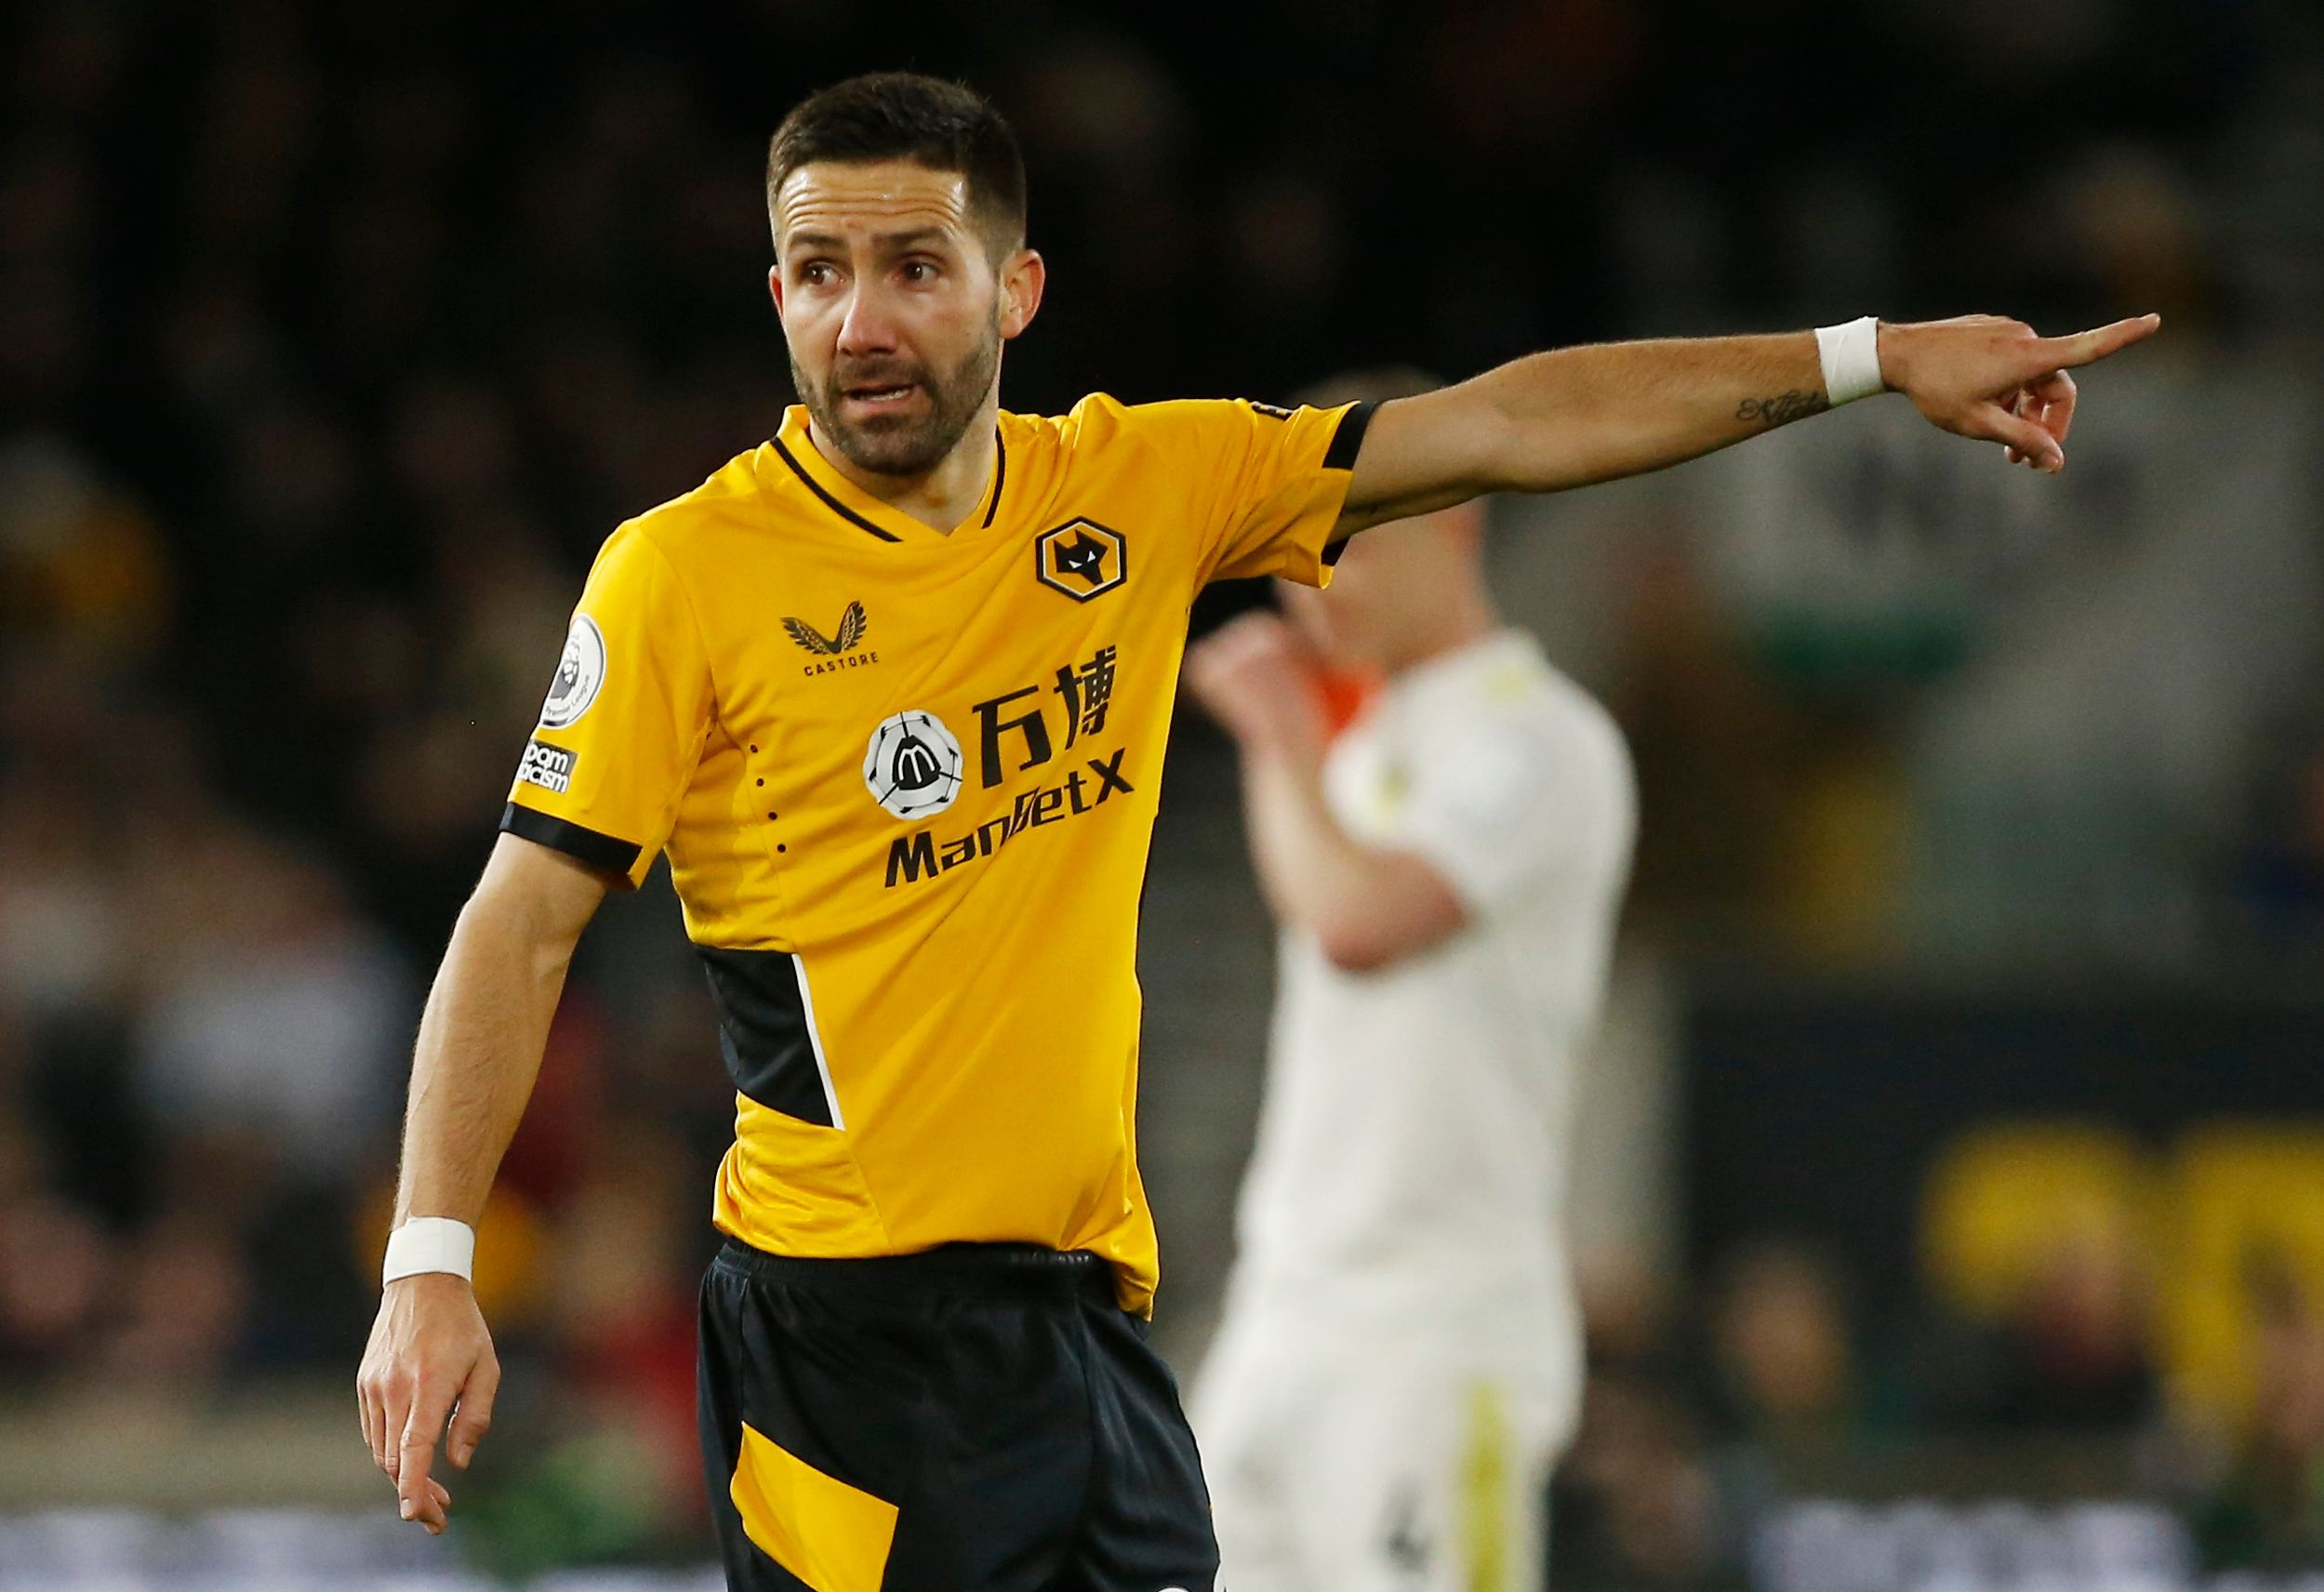 joao-moutinho-wolverhampton-wanderers-premier-league-bruno-lage-contract-tim-spiers-premier-league-transfer-news-molineuxSoccer Football - Premier League - Wolverhampton Wanderers v Leeds United - Molineux Stadium, Wolverhampton, Britain - March 18, 2022 Wolverhampton Wanderers' Joao Moutinho reacts REUTERS/Craig Brough EDITORIAL USE ONLY. No use with unauthorized audio, video, data, fixture lists, club/league logos or 'live' services. Online in-match use limited to 75 images, no video emulation